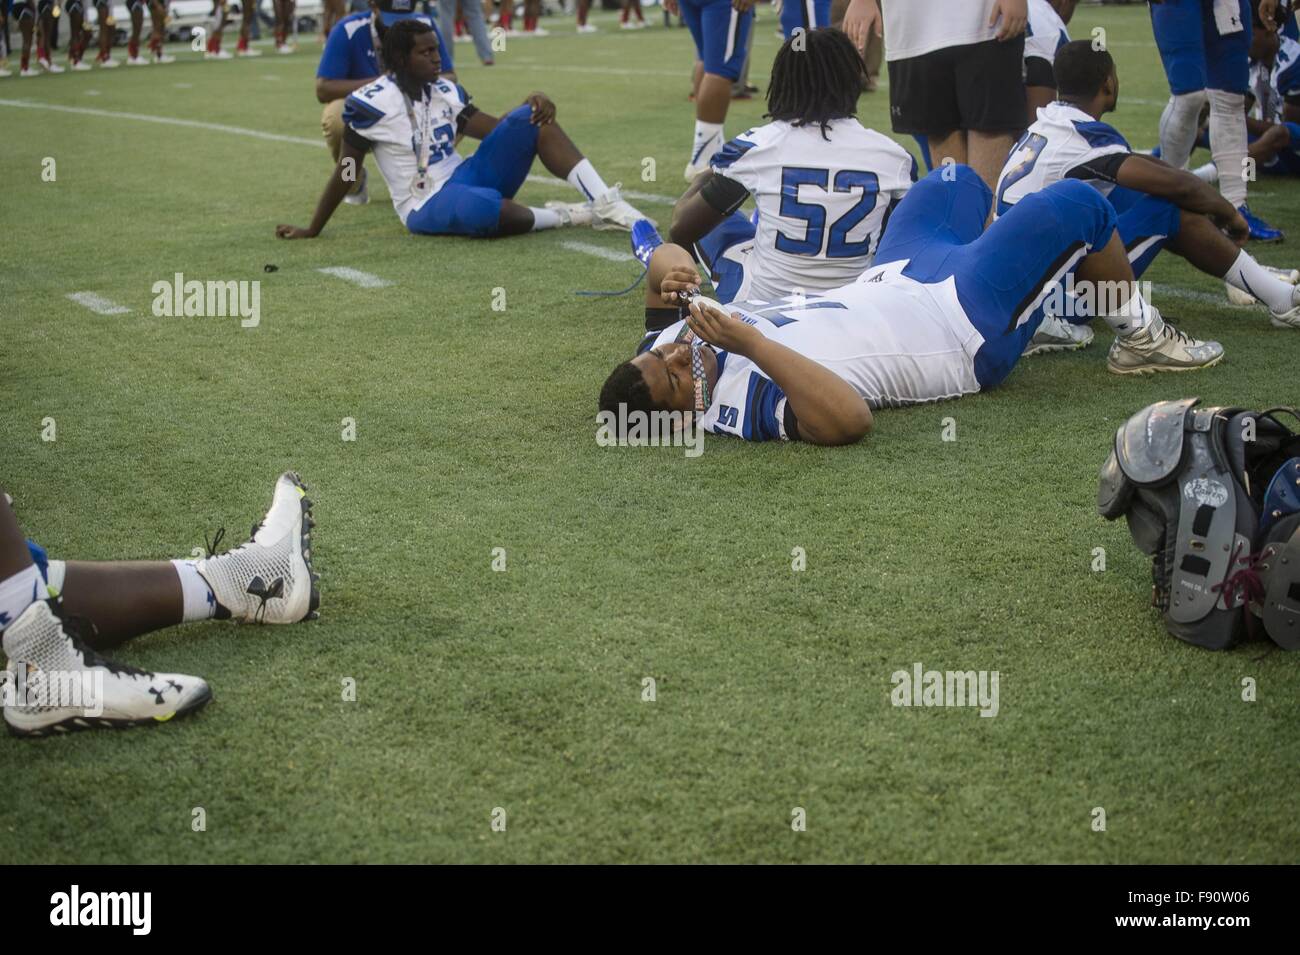 Florida, USA. 12th Dec, 2015. Zack Wittman | Times.Armwood's Malik Hunt-Cruz lies on the ground while he inspects his silver medal after losing 13-48 to Miami Central after Armwood High School's game against Miami Central Senior High School in the Class 6A 2015 FHSAA Football Finals on Saturday afternoon, December 12, 2015 at the Citrus Bowl in Orlando. © Tampa Bay Times/ZUMA Wire/Alamy Live News Stock Photo